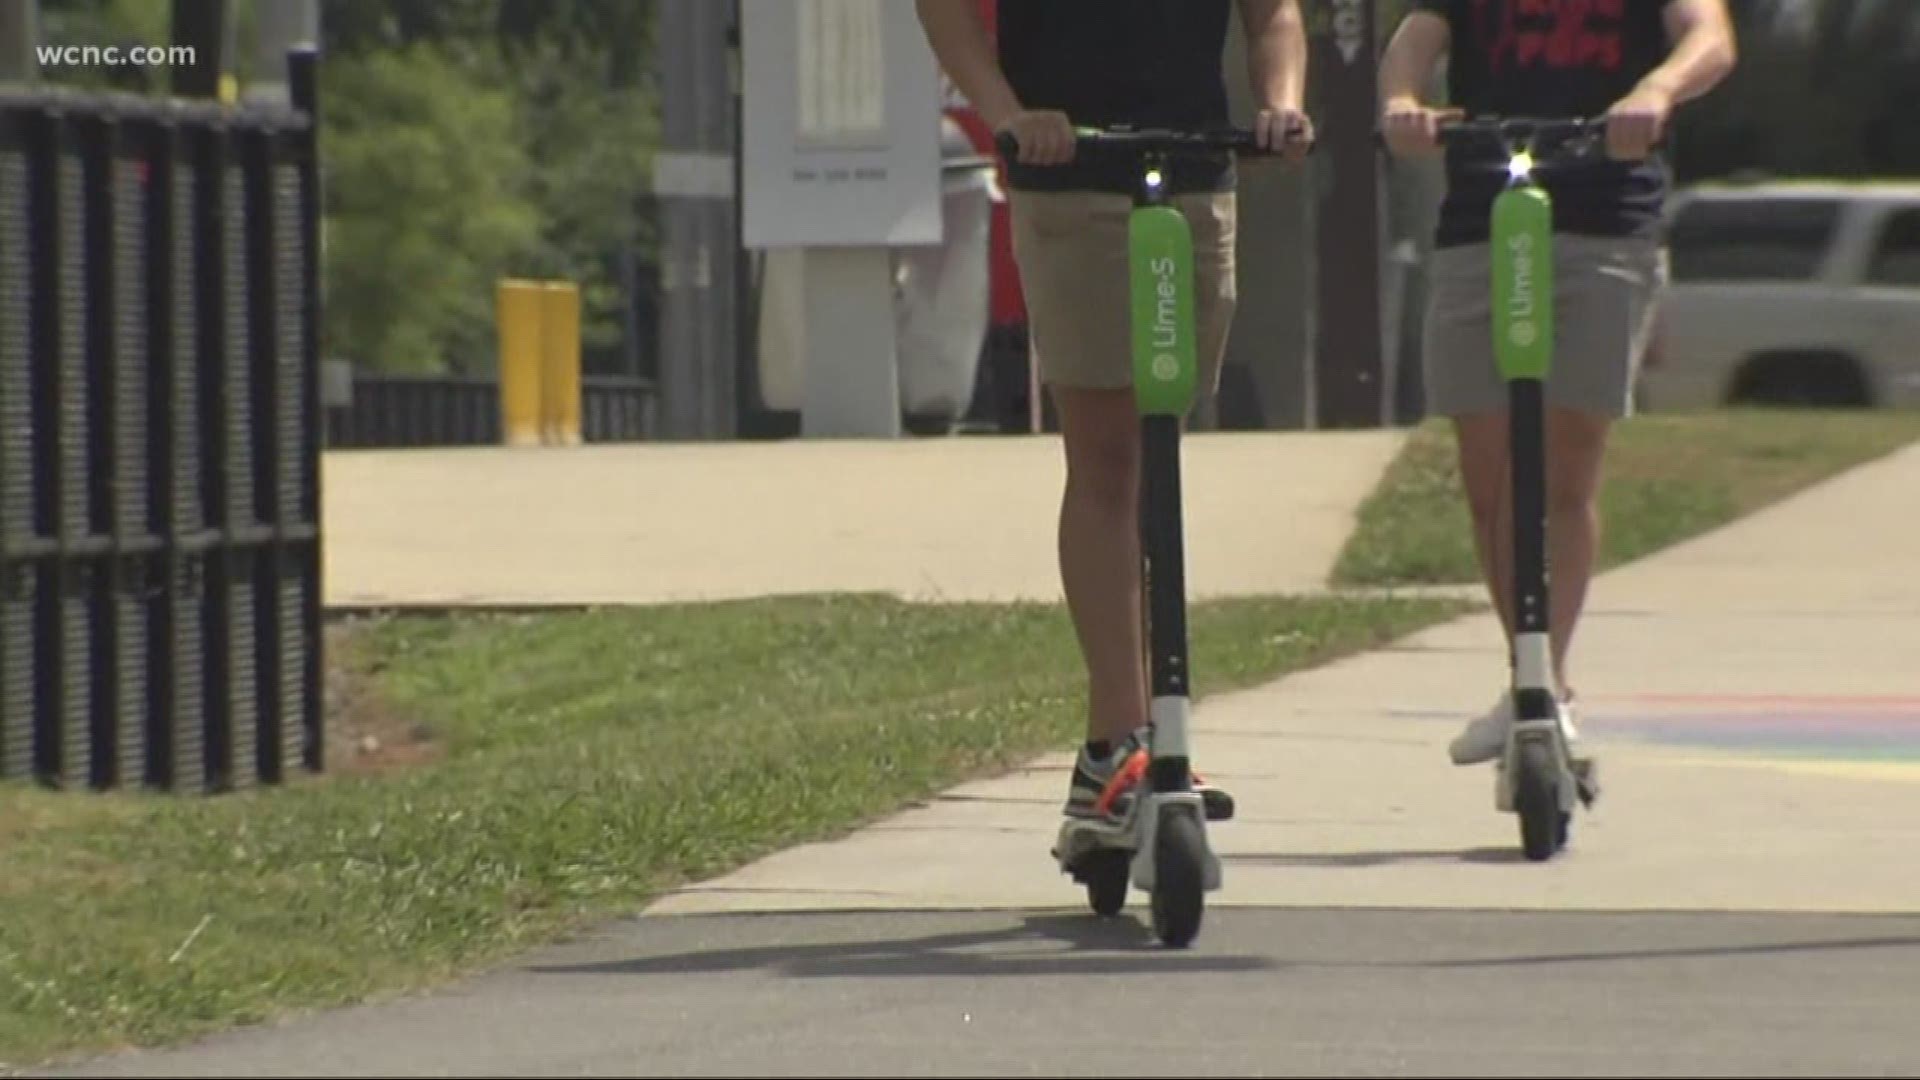 Neighbors worried about drunk scooter riders